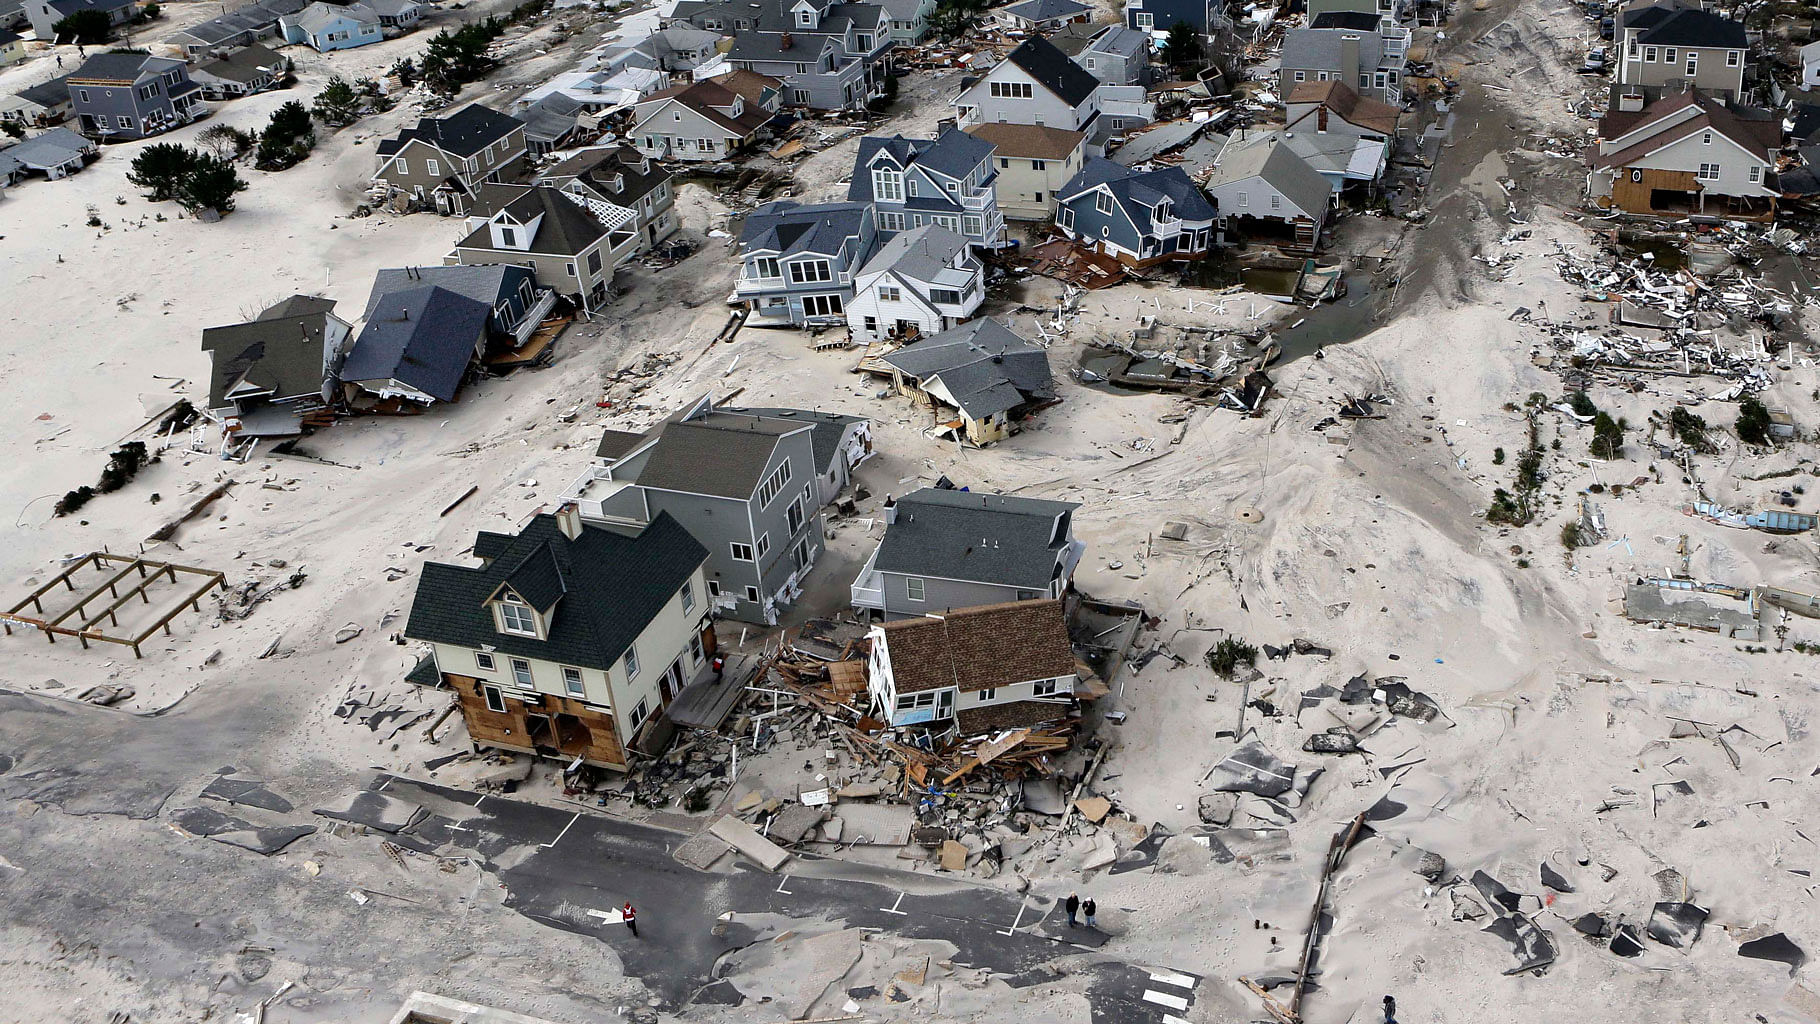 In this 31 Oct0ber 2012 file photo, a view from the air shows the destroyed homes  in the wake of Superstorm Sandy in Ortley Beach, N.J. (Photo: AP)